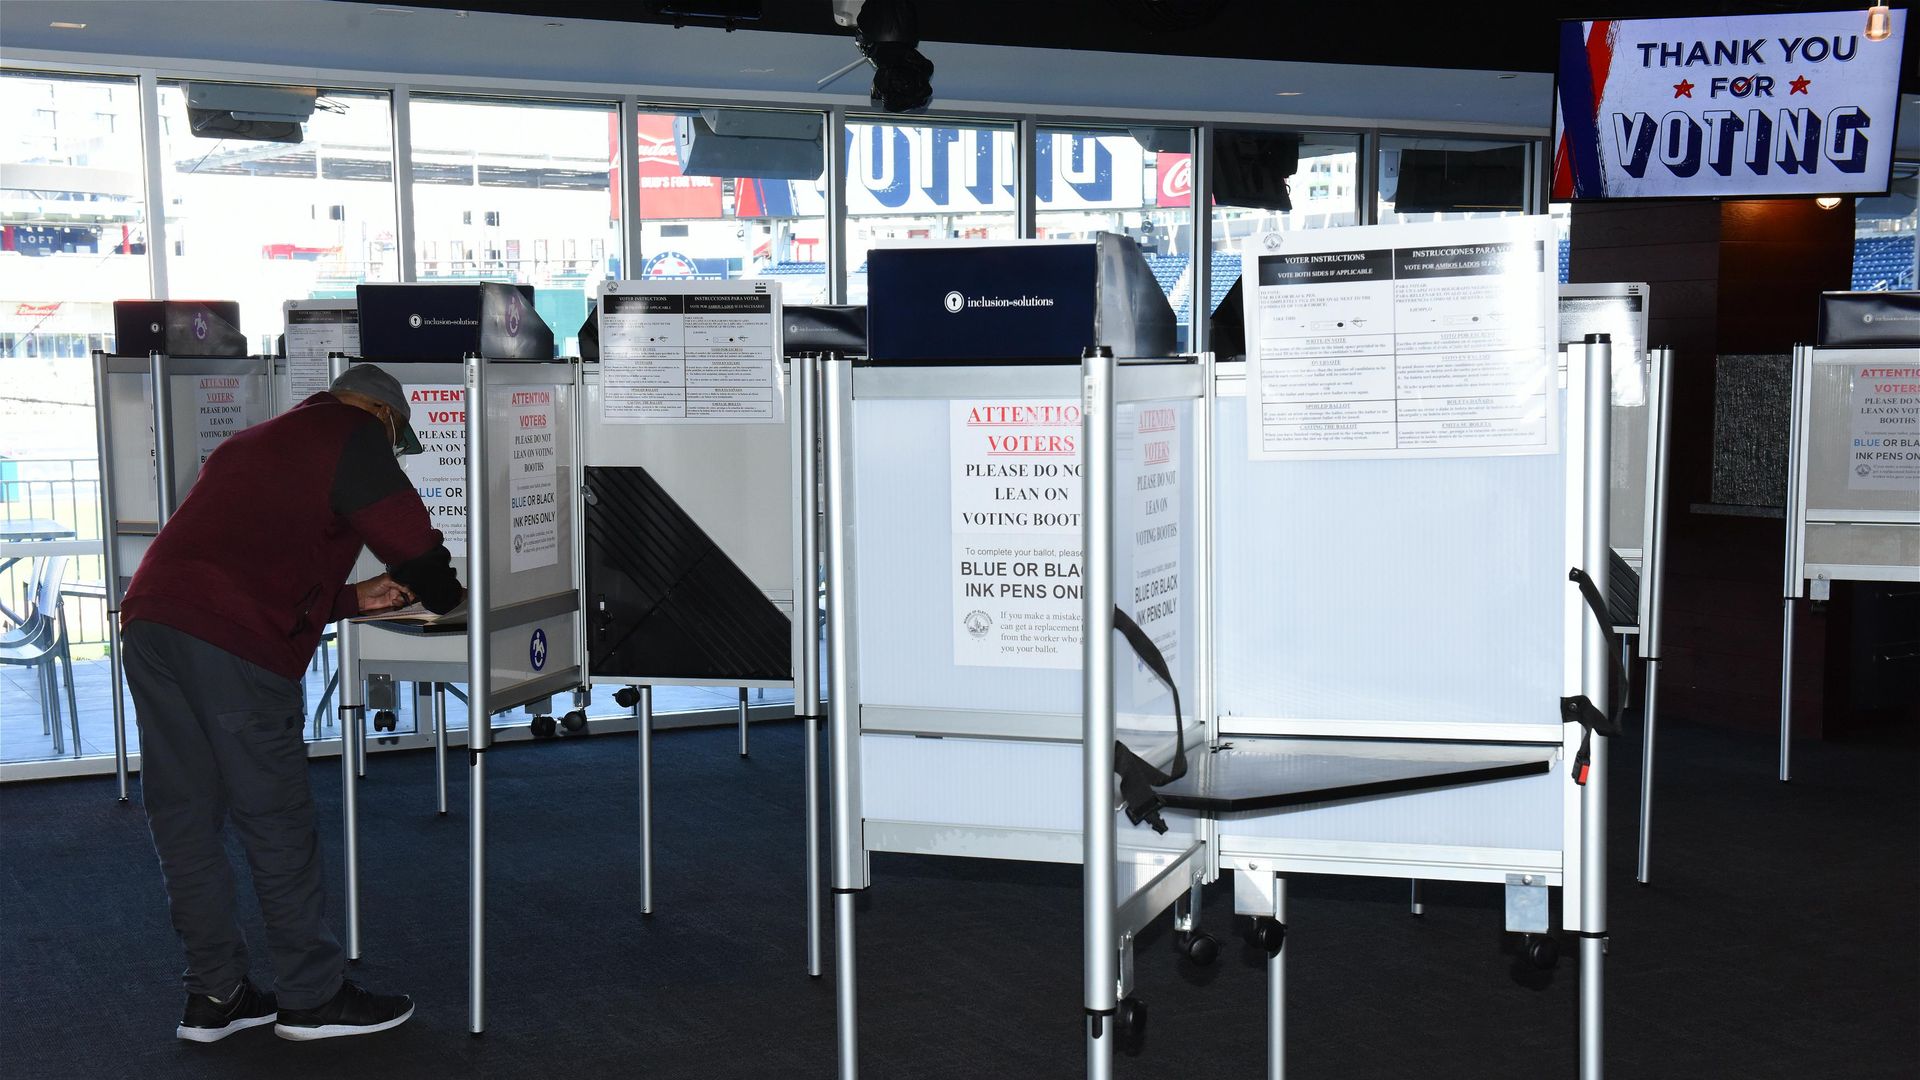 A voter casts his ballot for the 2020 U.S. presidential election at the Nationals Park baseball stadium